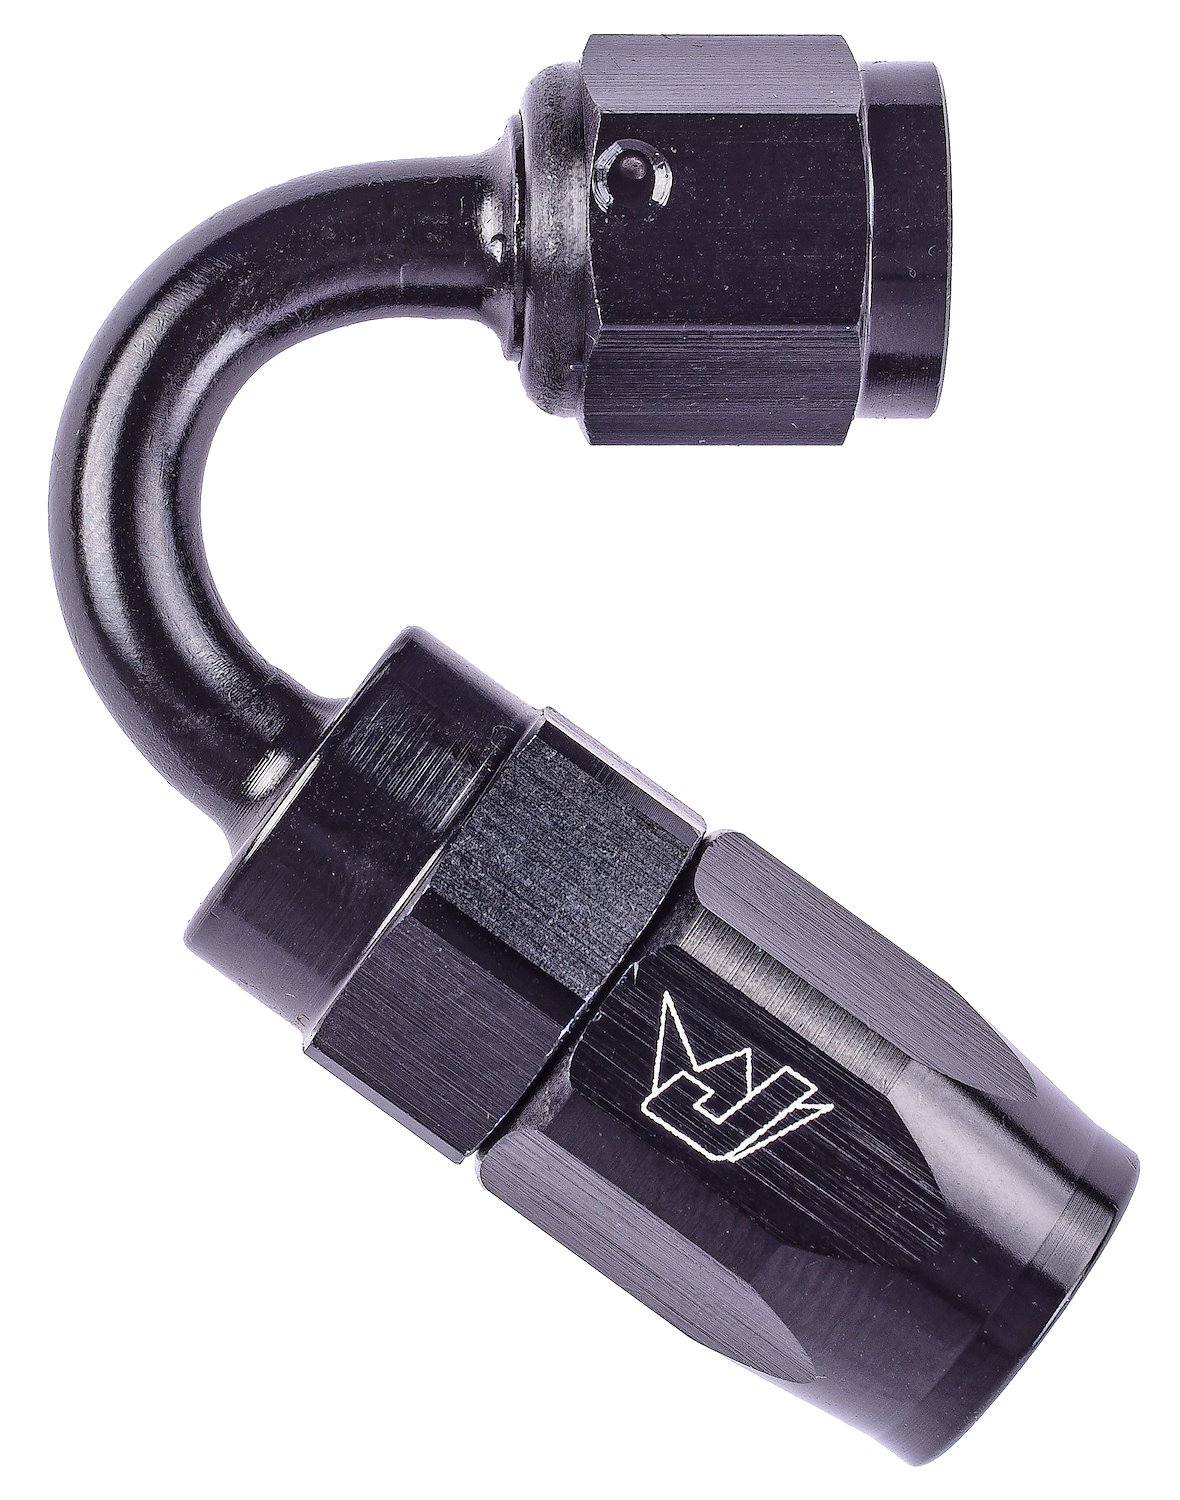 AN 150-Degree Max Flow Swivel Hose End [-4